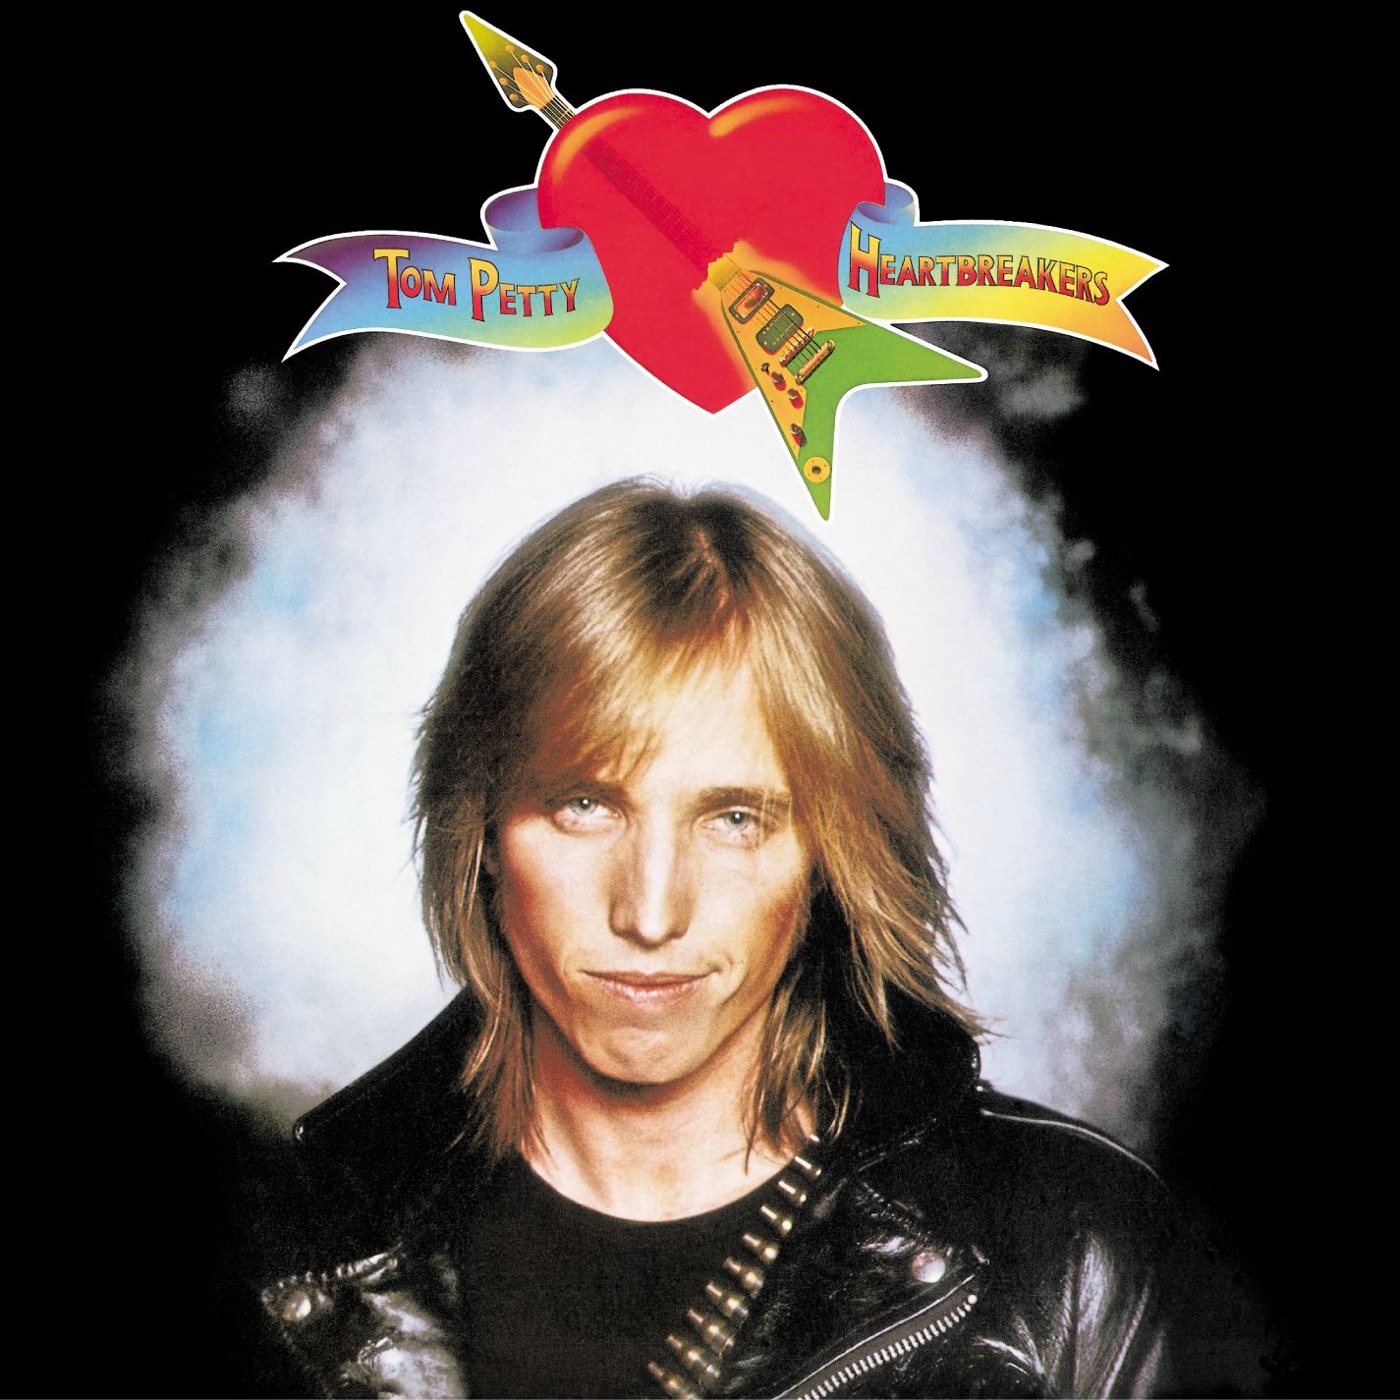 Tom Petty & The Heartbreakers by Tom Petty and the Heartbreakers, Tom Petty & The Heart Breakers